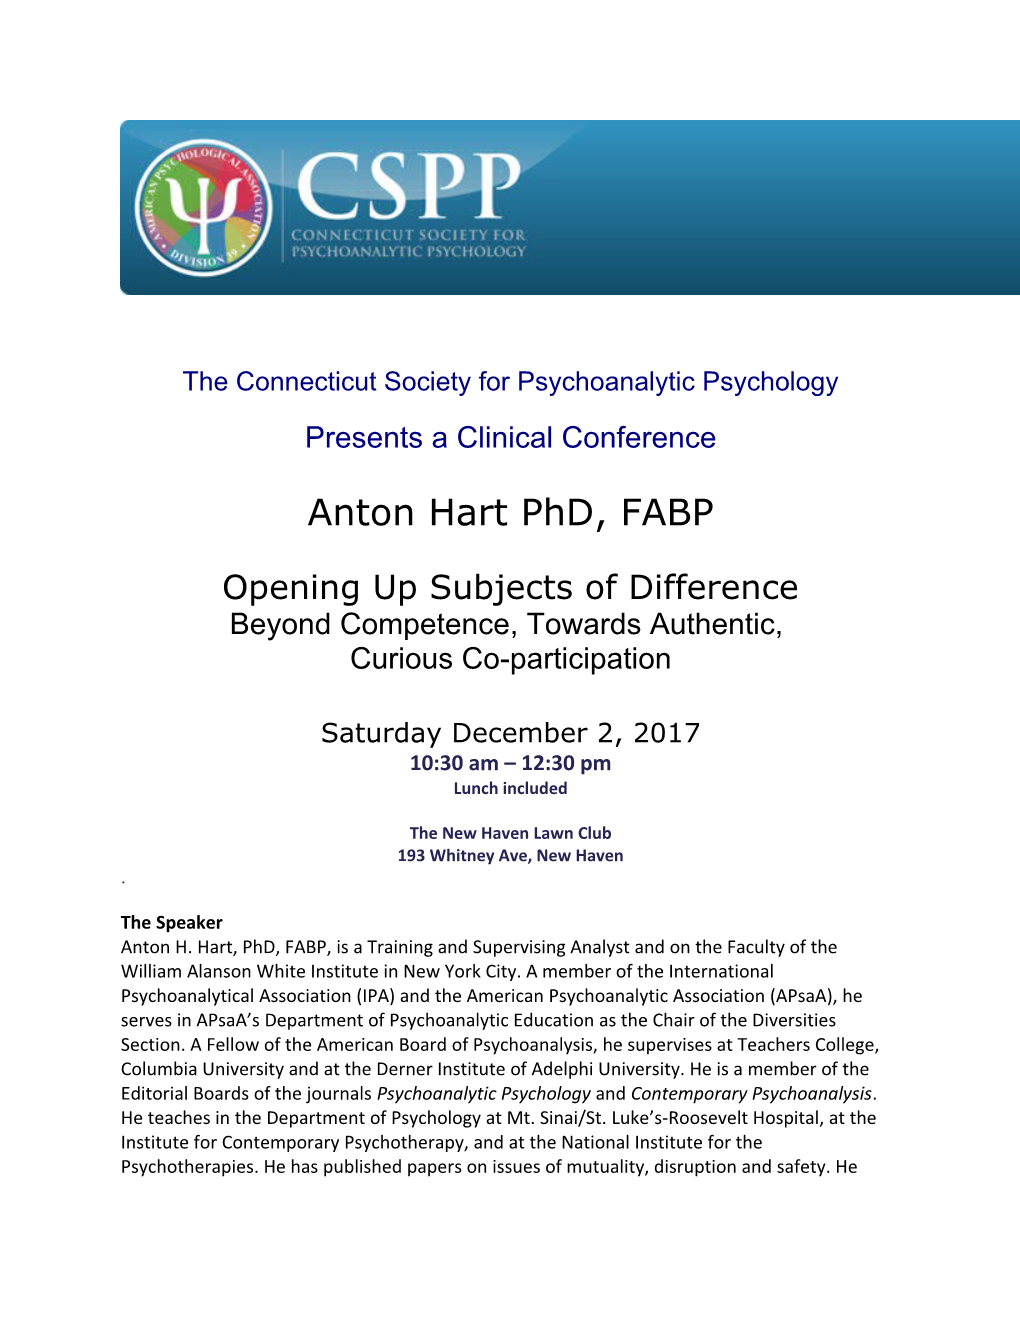 The Connecticut Society for Psychoanalytic Psychology